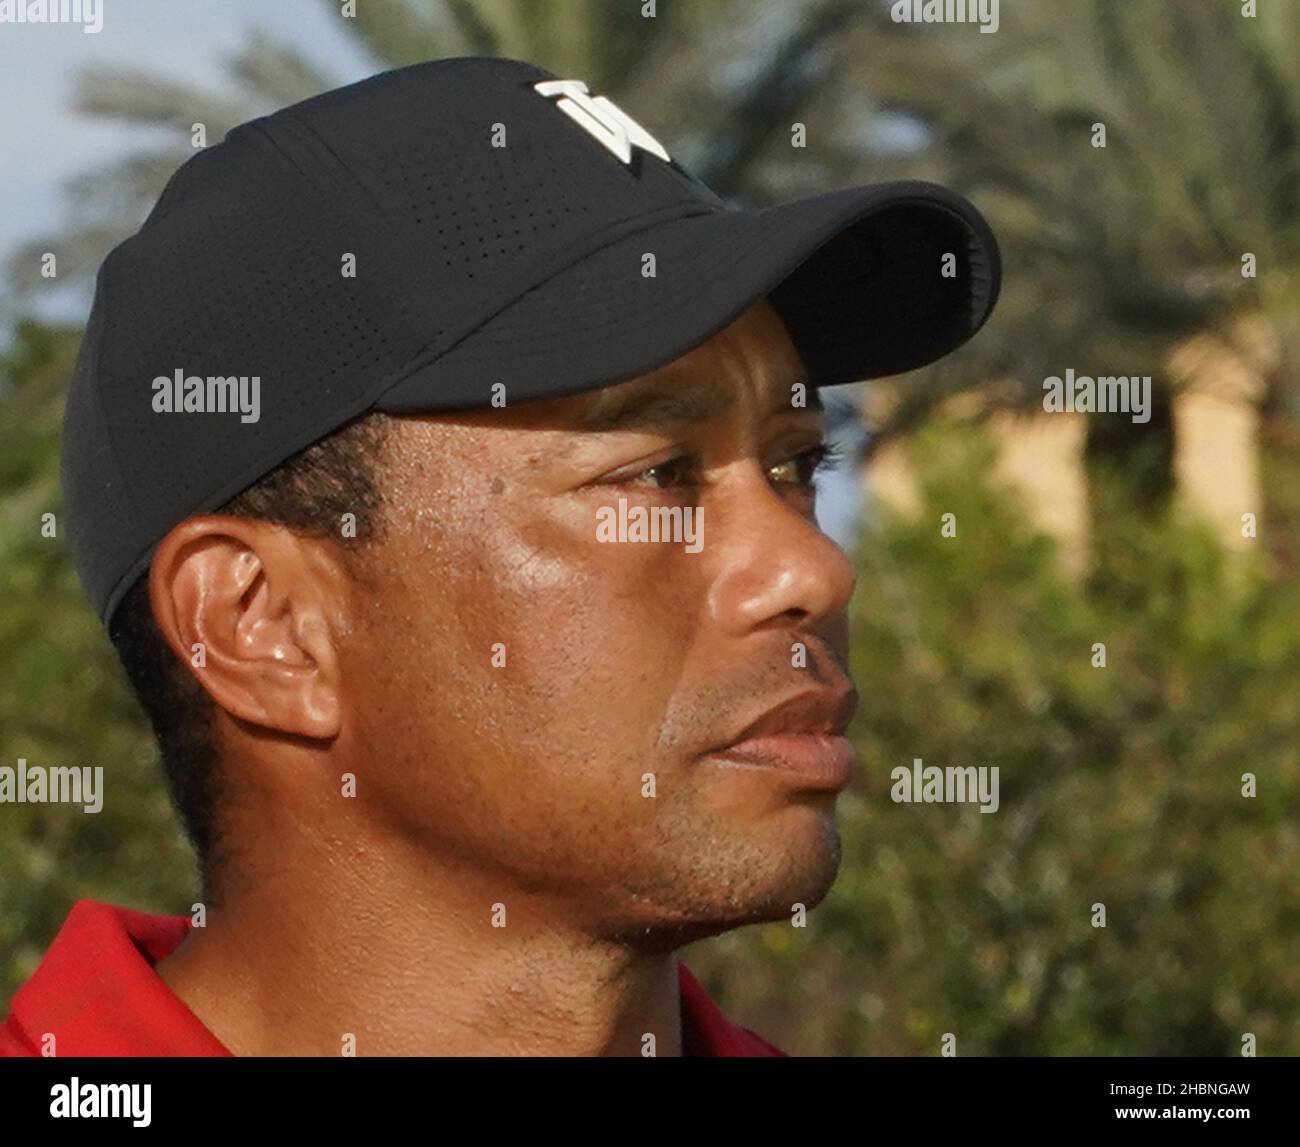 Orlando, United States. 19th Dec, 2021. Tiger Woods is seen after completing the final round of the PNC Championship at the Ritz-Carlton Golf Club Grande Lakes in Orlando. Tiger and his son, Charlie Woods, set a tournament record with 11 consecutive birdies on Sunday, shooting a 15-under-par 57 and finishing second in the 36-hole tournament. (Photo by Paul Hennessy/SOPA Images/Sipa USA) Credit: Sipa USA/Alamy Live News Stock Photo